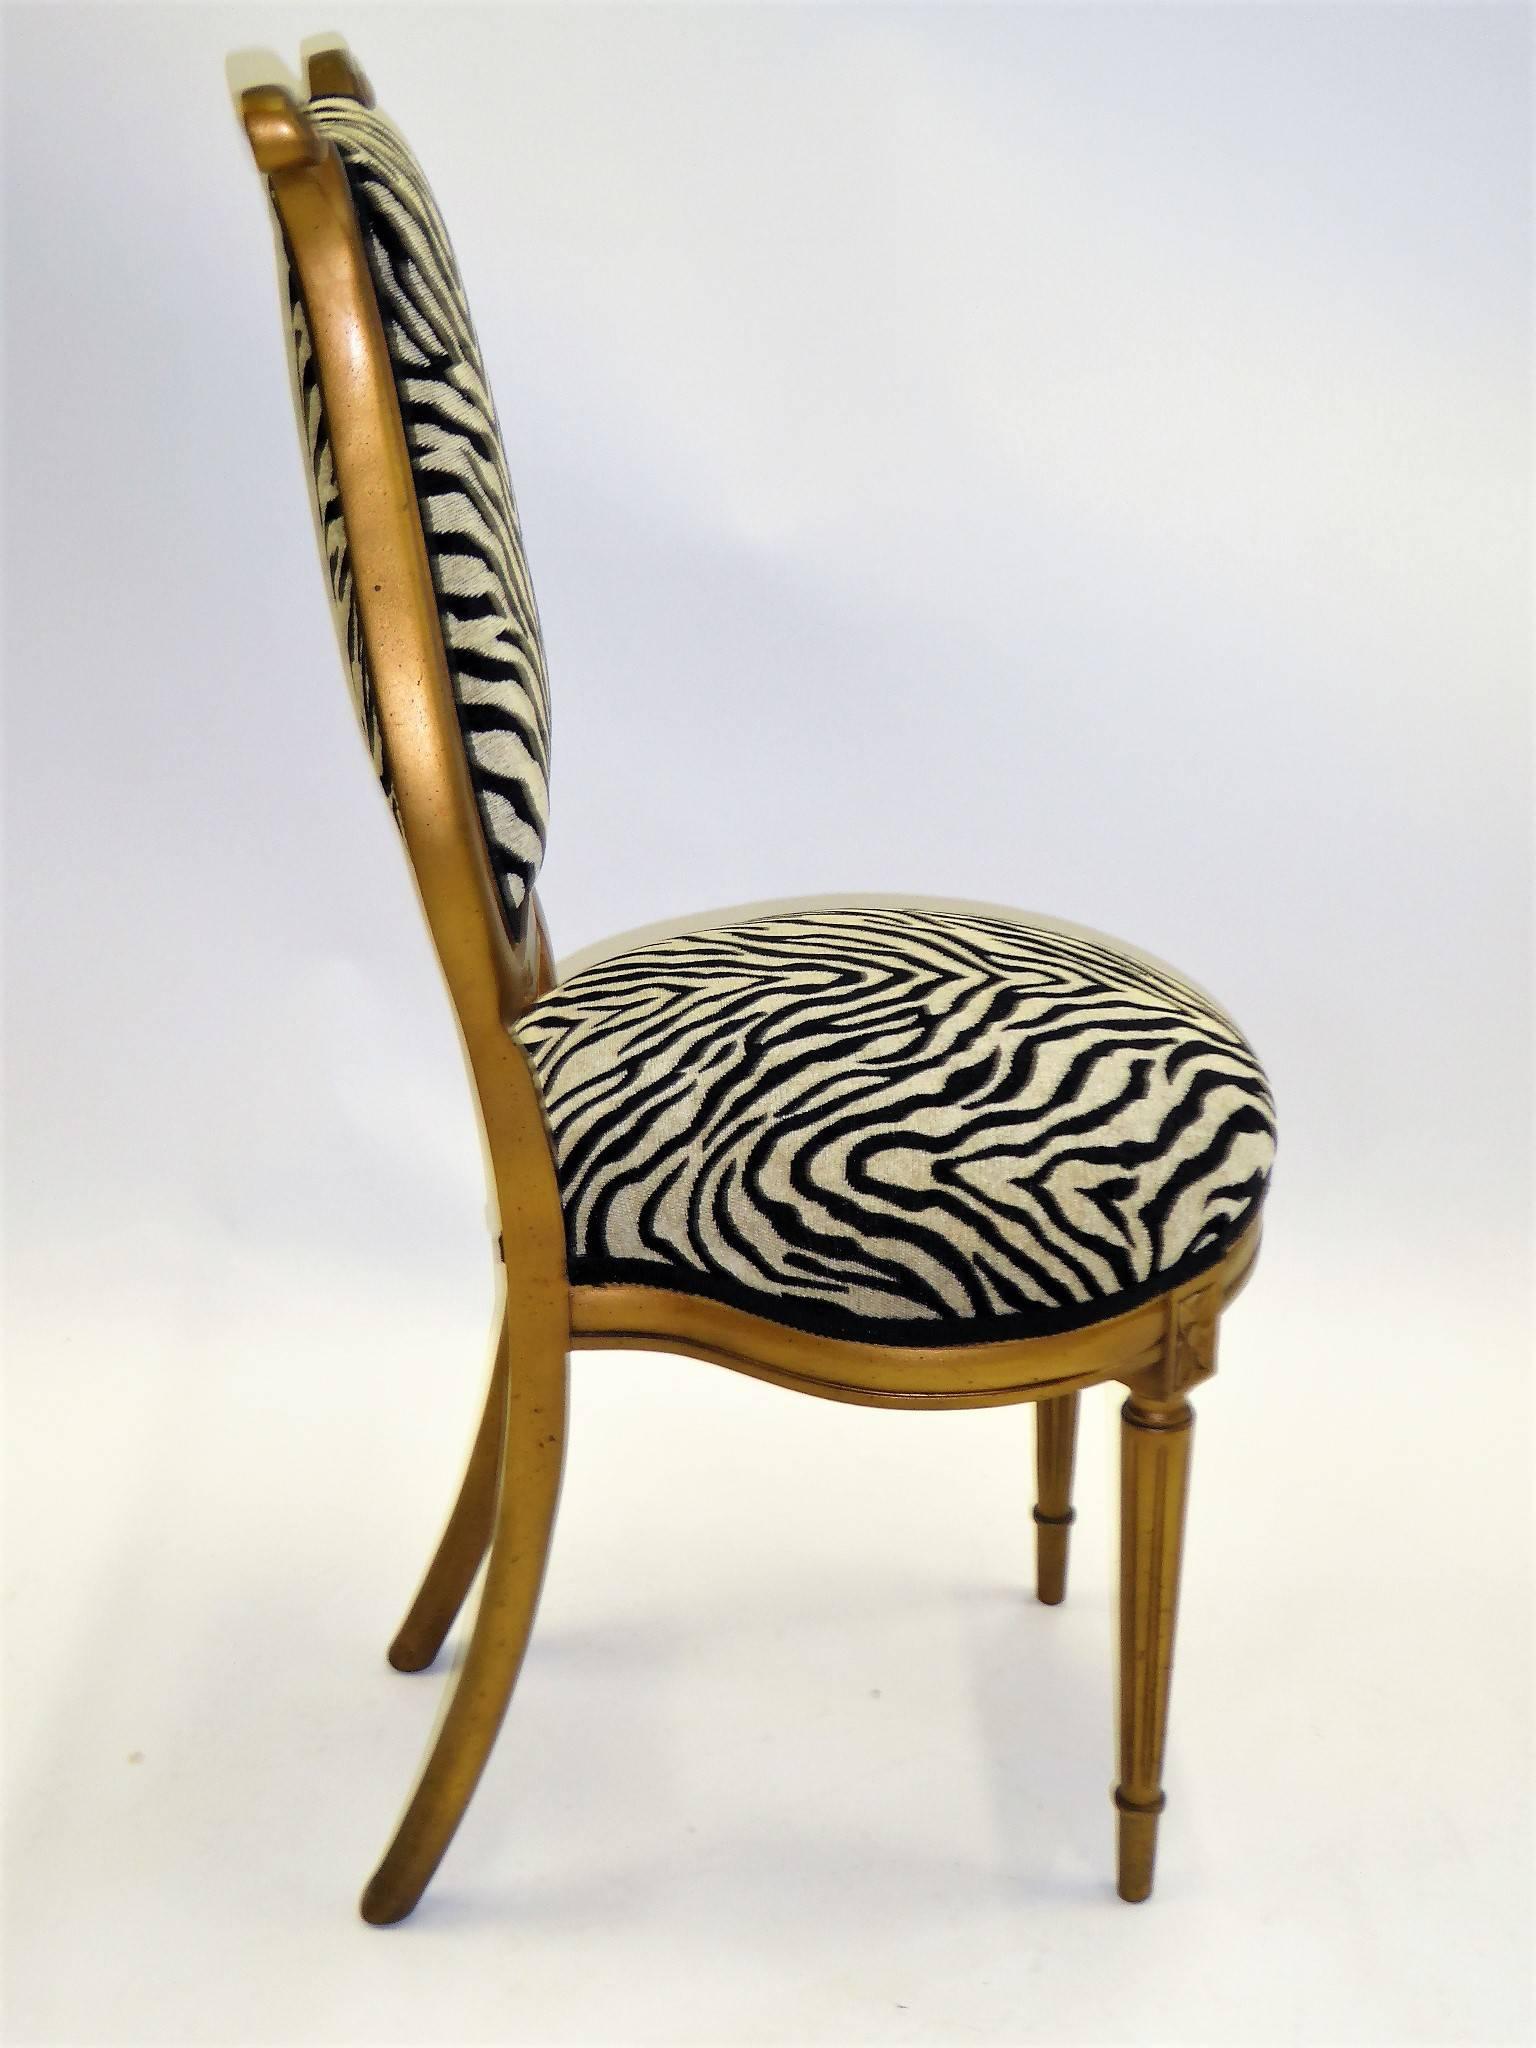 American 1940s Musical Motif Carved Giltwood Side Chair in Zebra Chenille